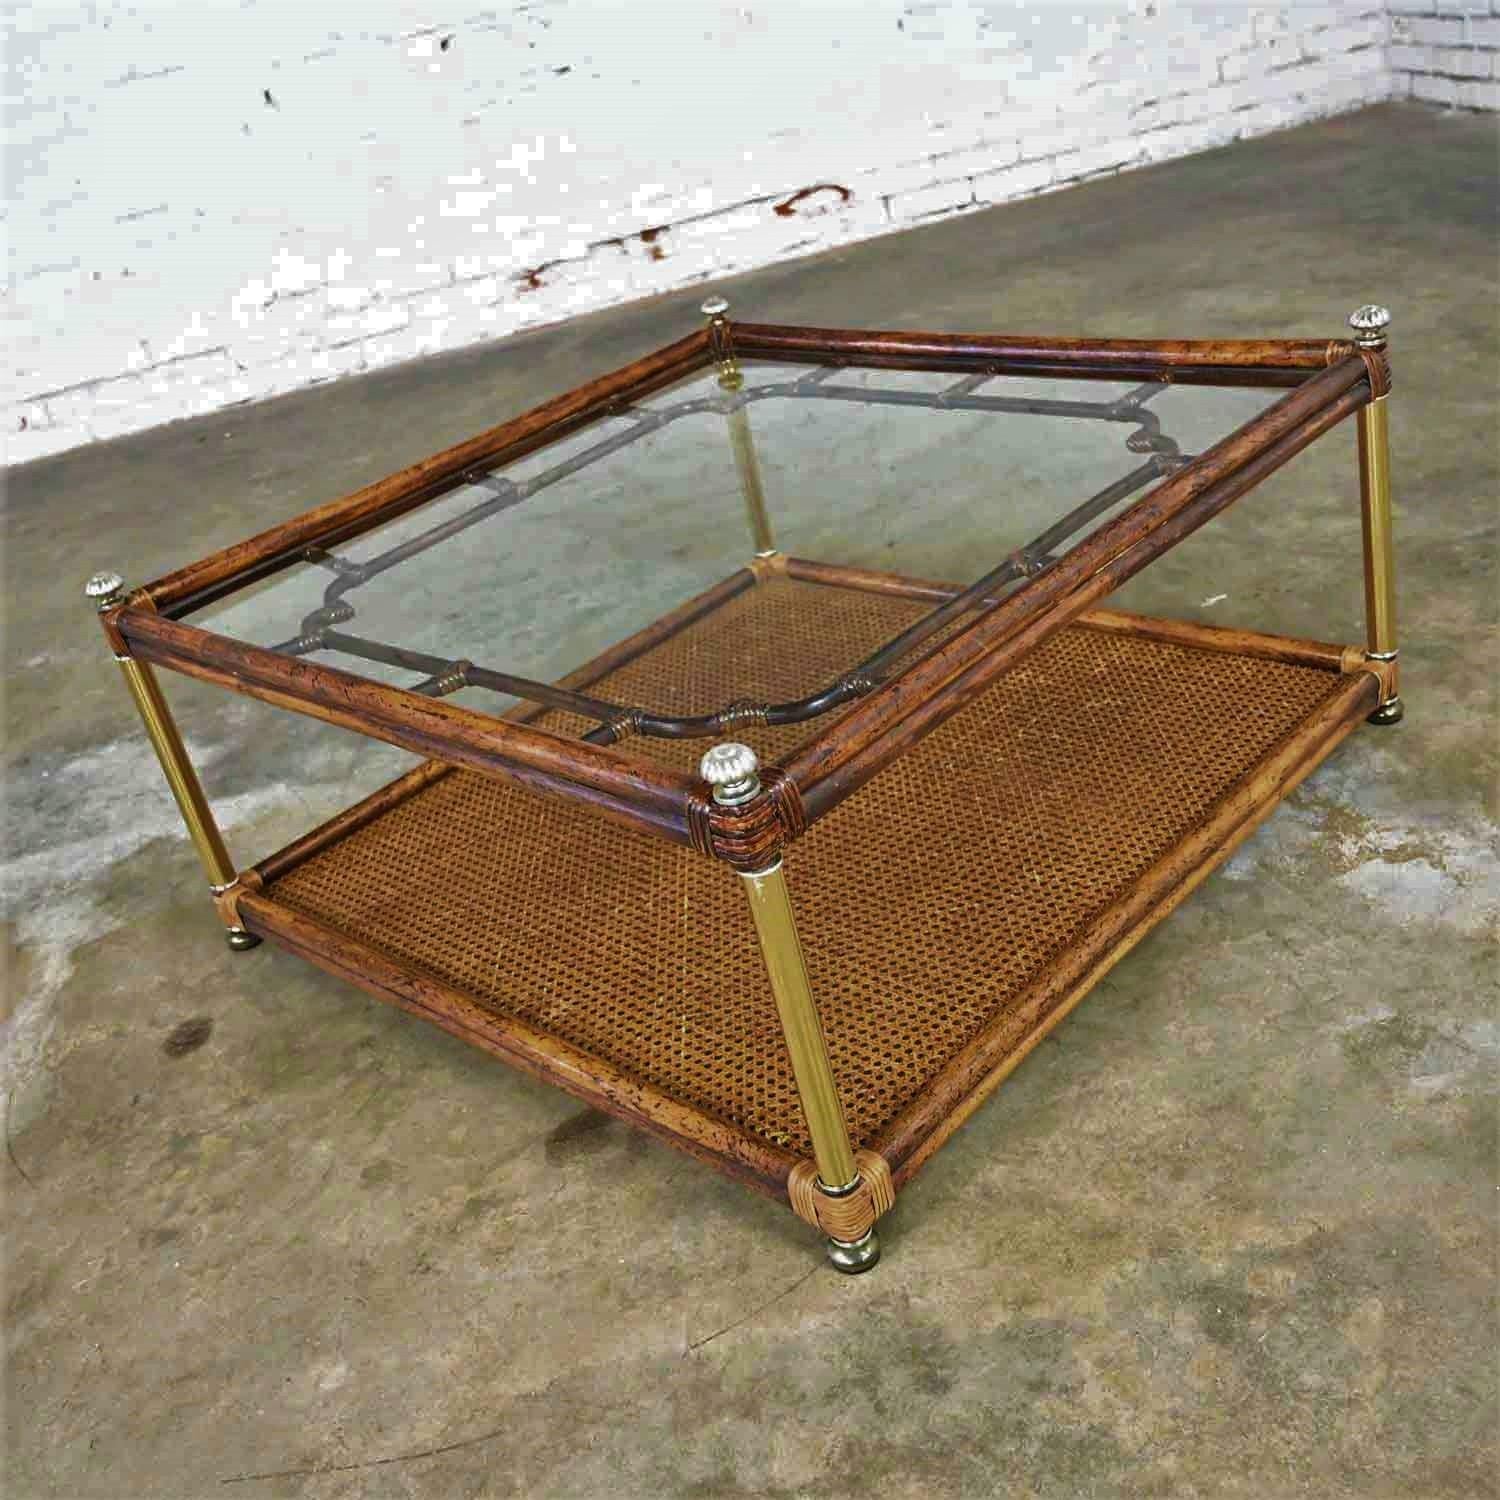 Lovely Hollywood Regency, Campaign, and/or Chinoiserie style faux bamboo, cane, and glass top coffee table. Comprised of a dark stained wood frame, silver and brass tone accents, rattan wrappings, cane bottom shelf, faux bamboo look designs, and a